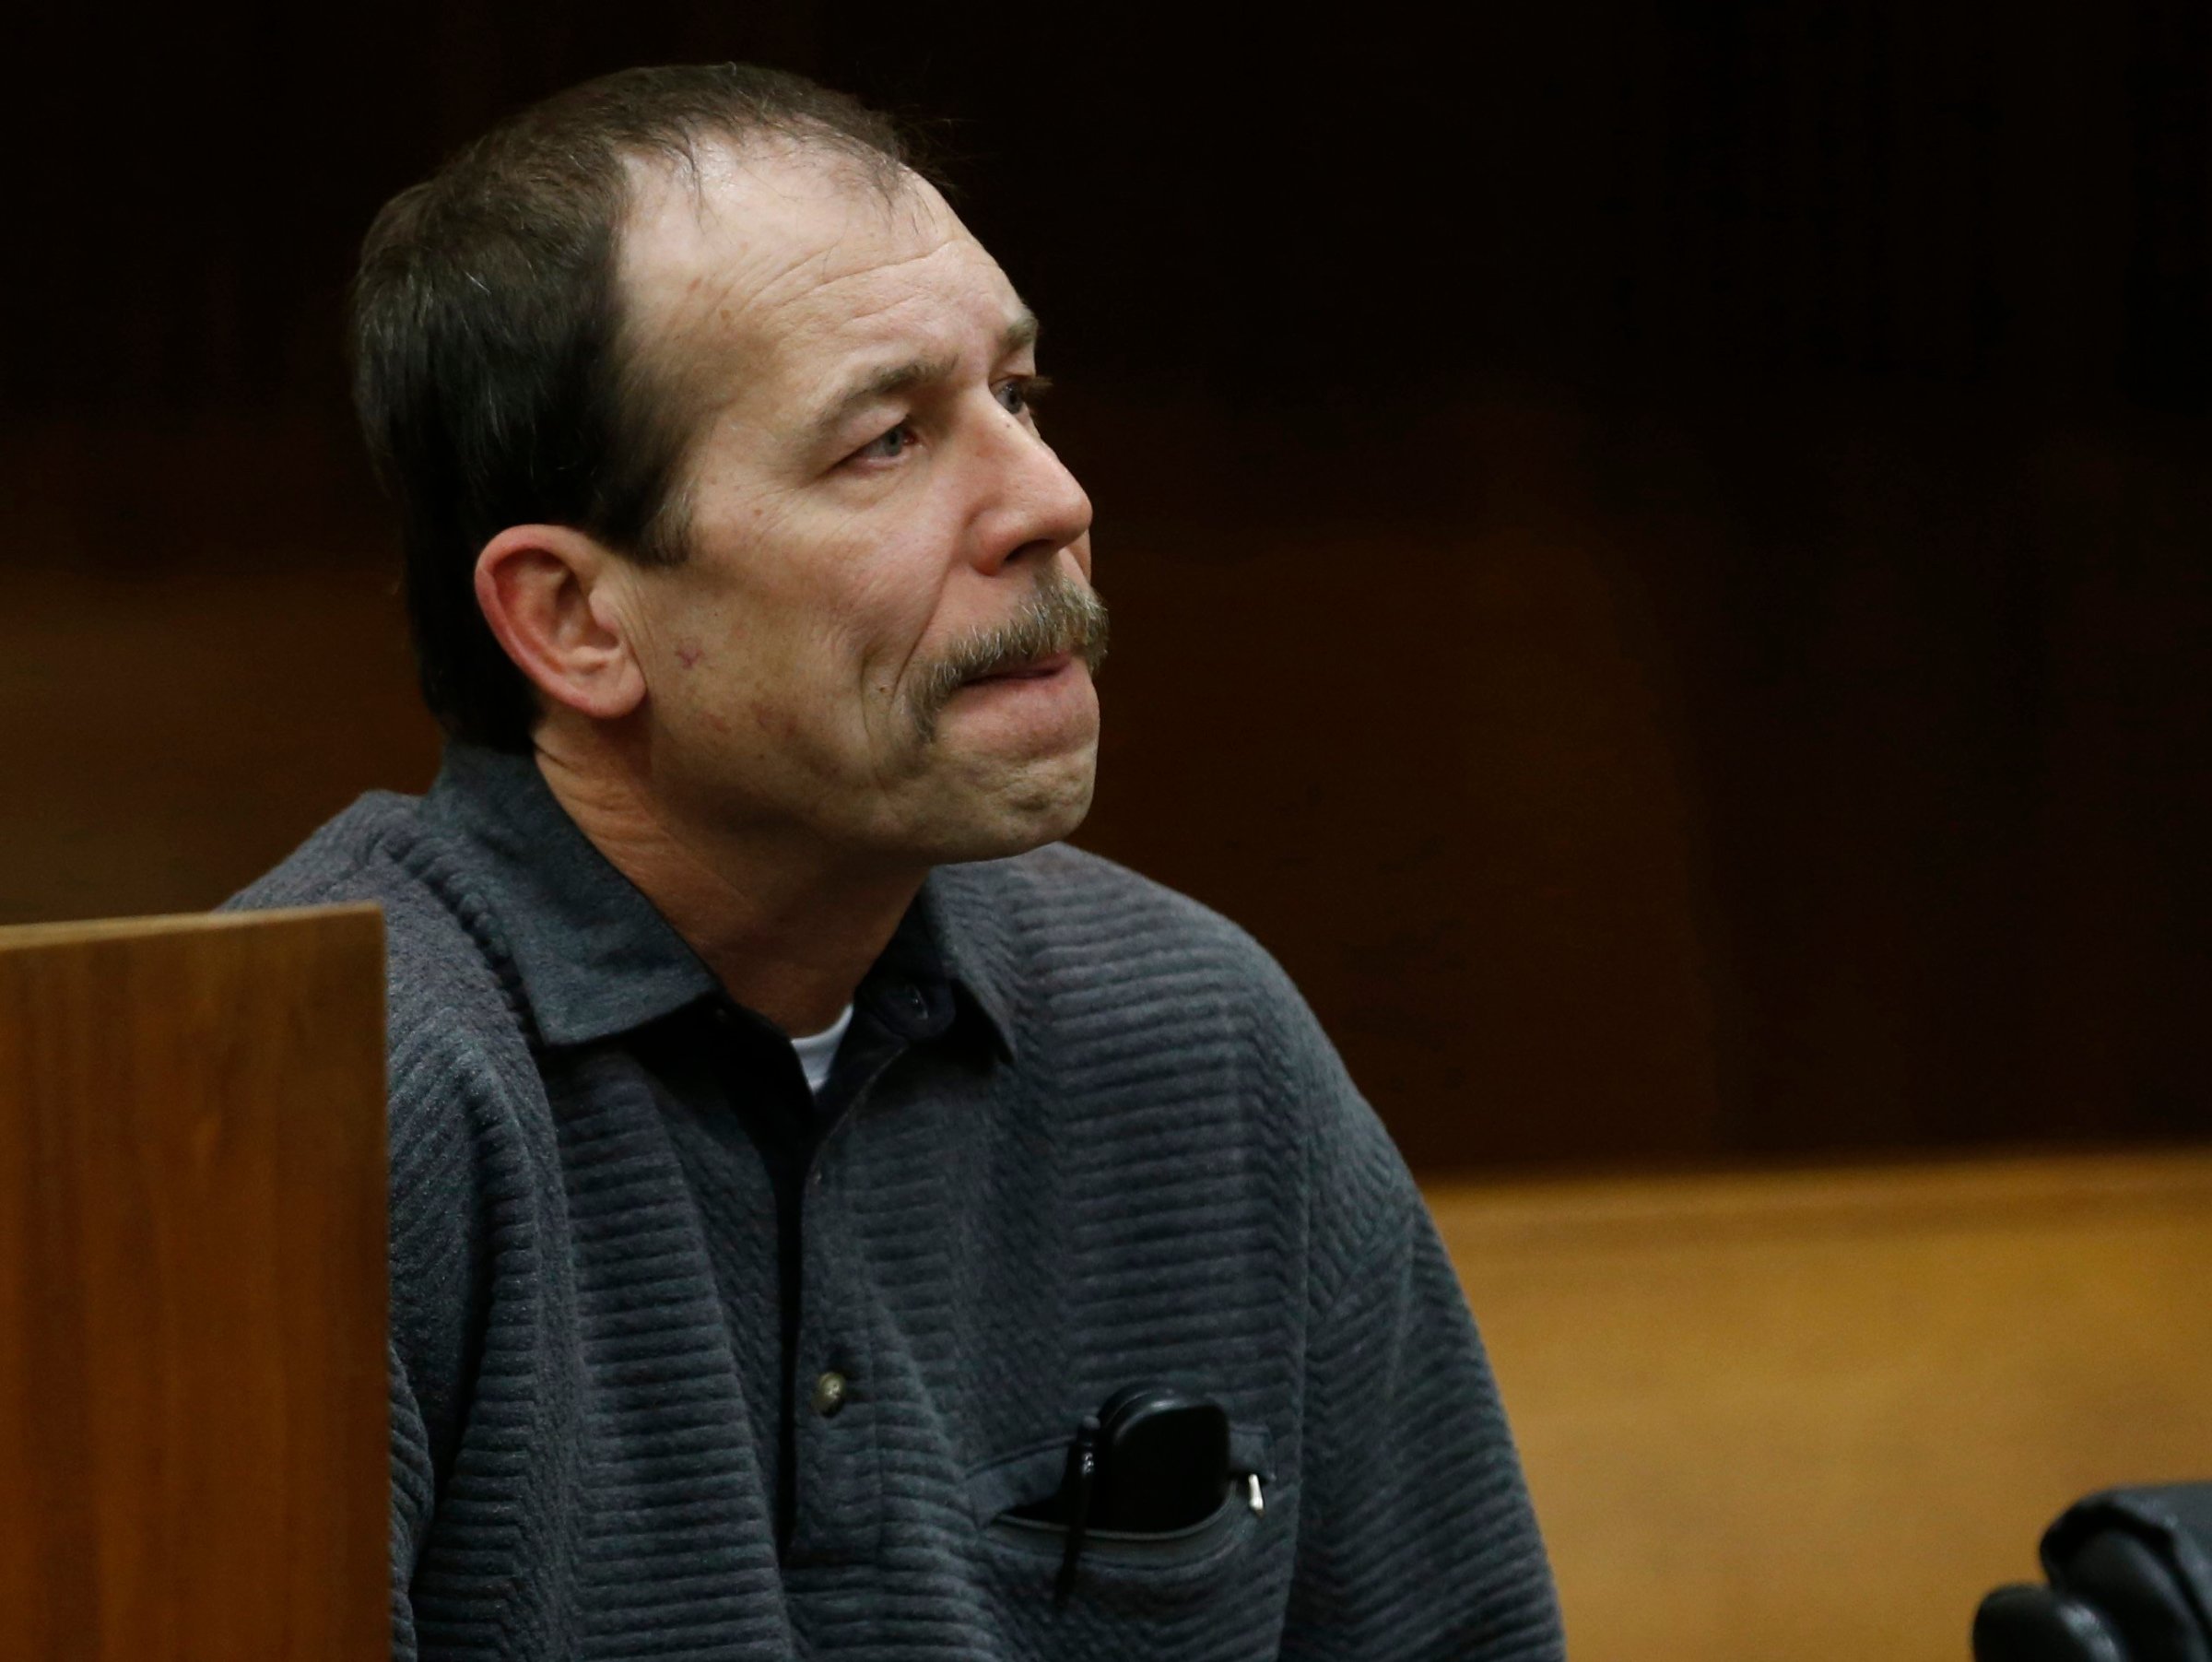 Theodore Wafer sits in the court room during his arraignment in Detroit, Michigan on January 15, 2014.